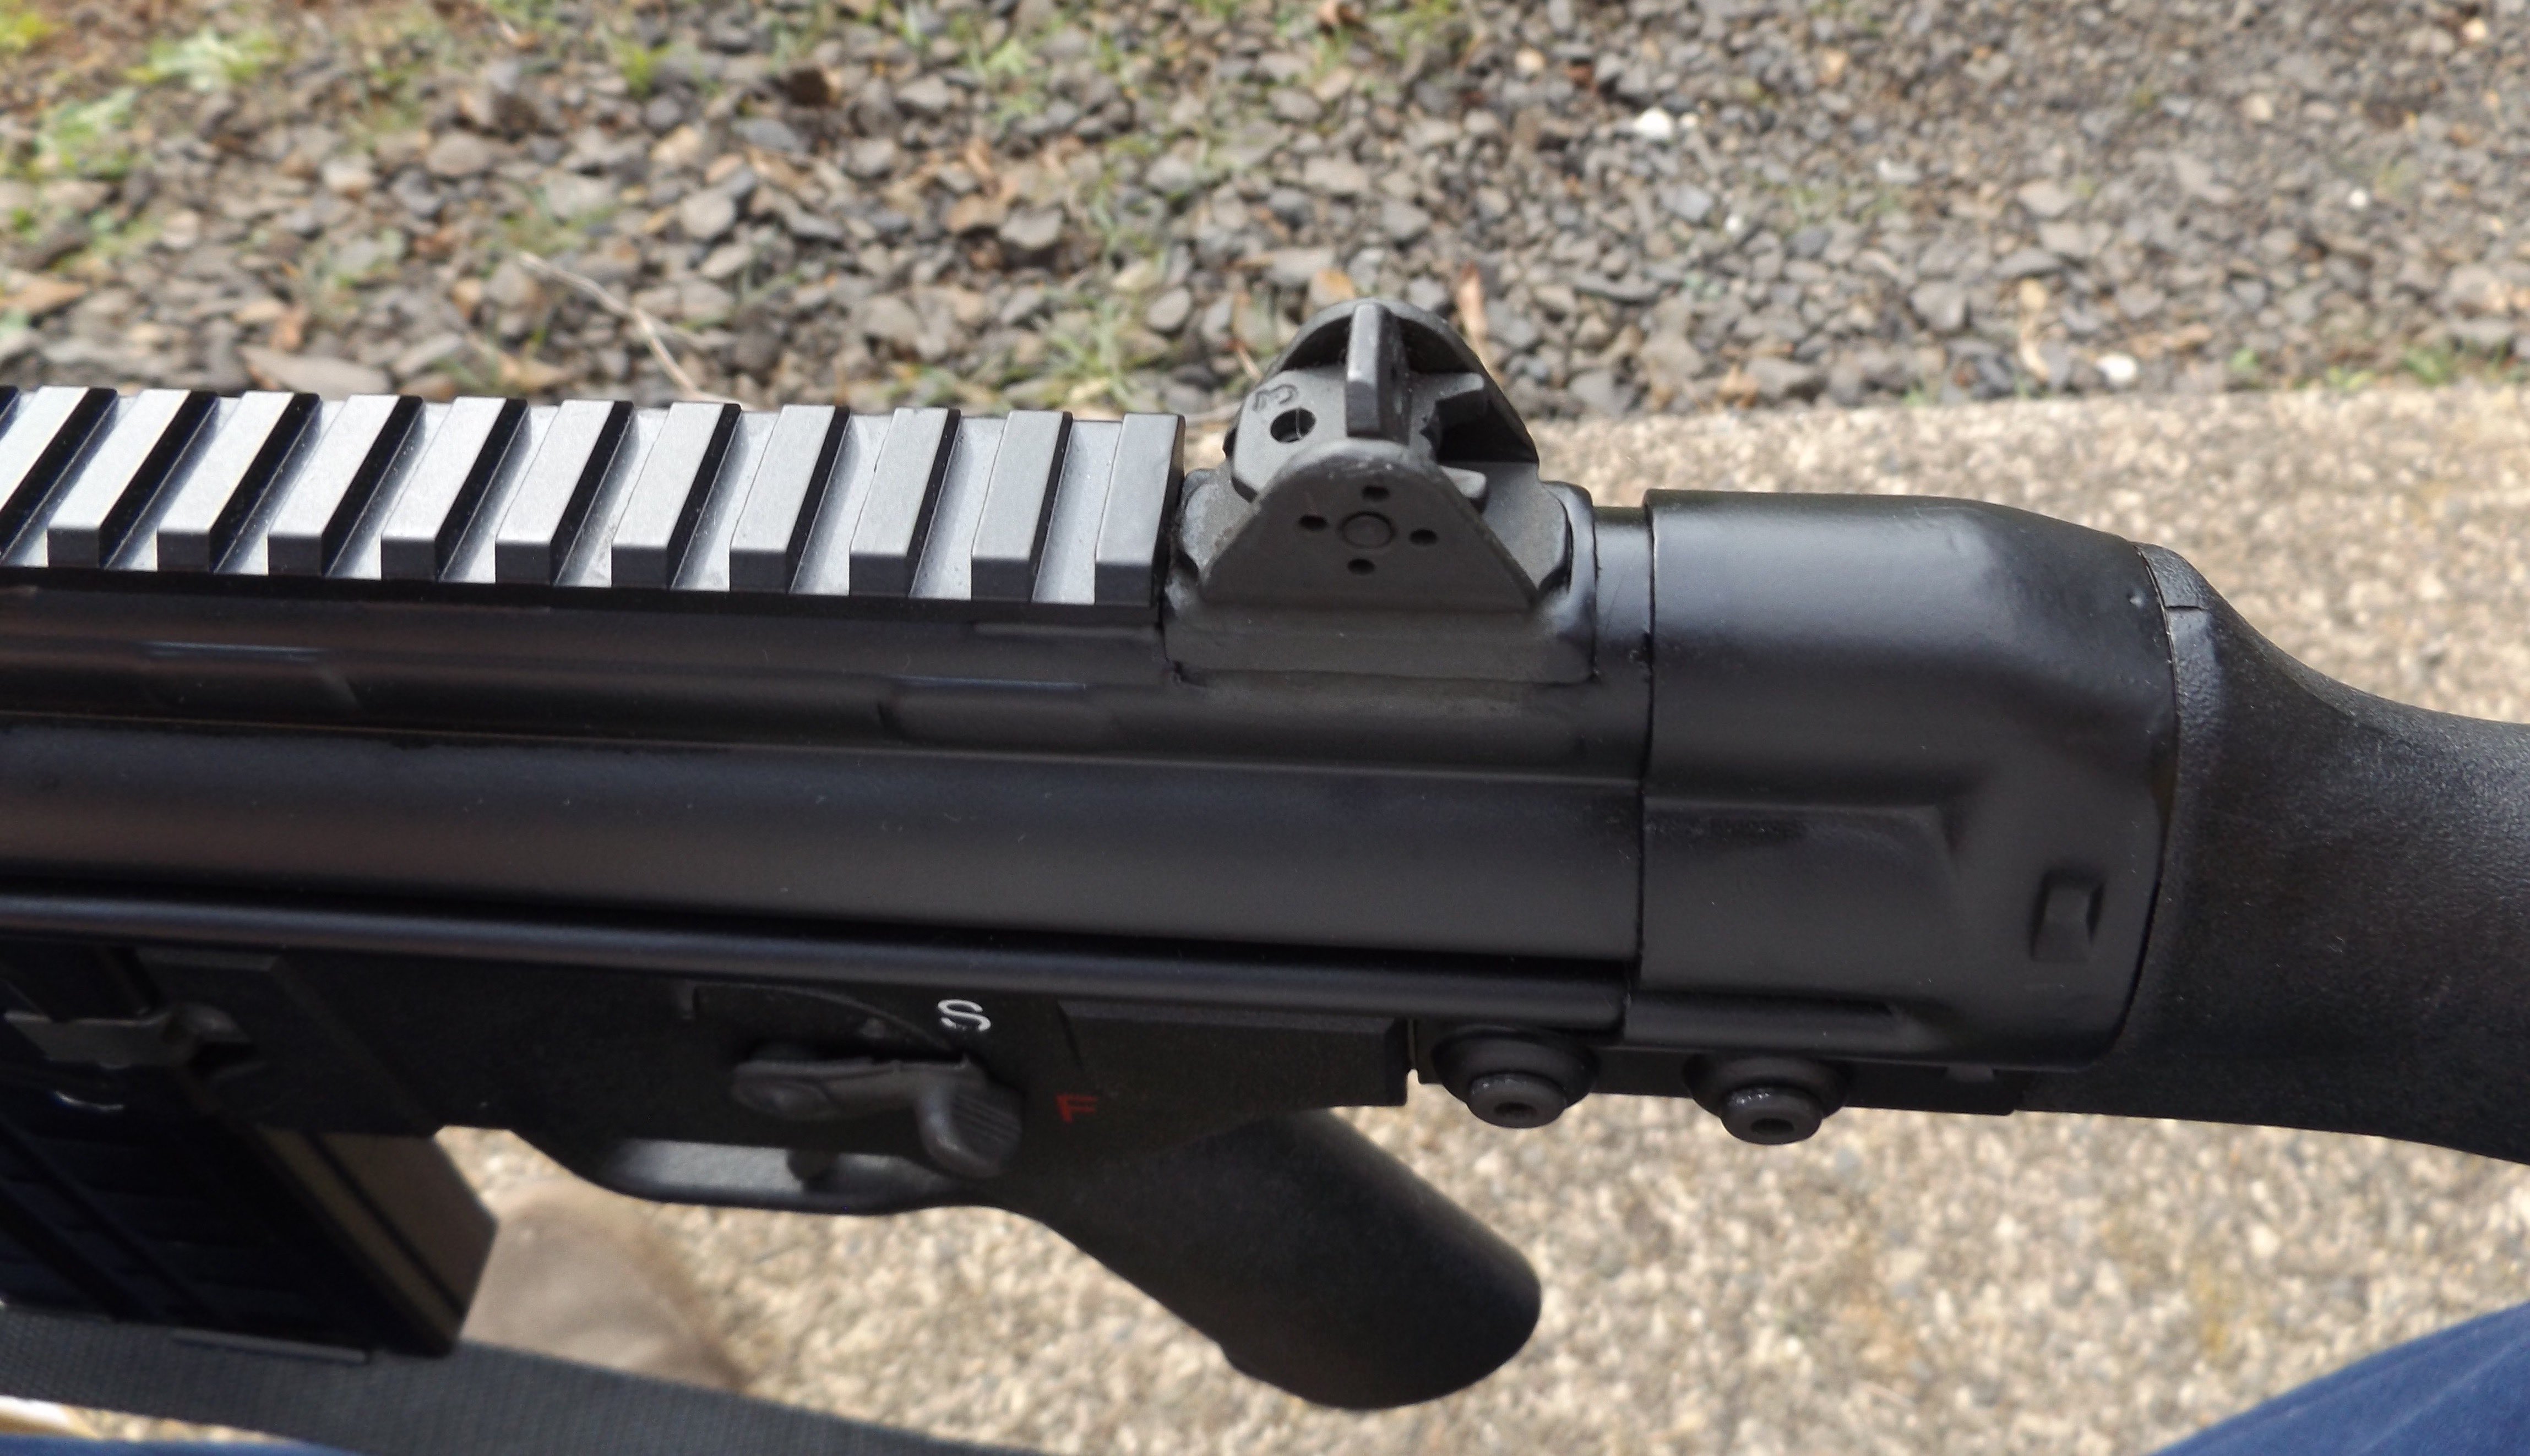 So, what do we have with the Century Arms C308? 